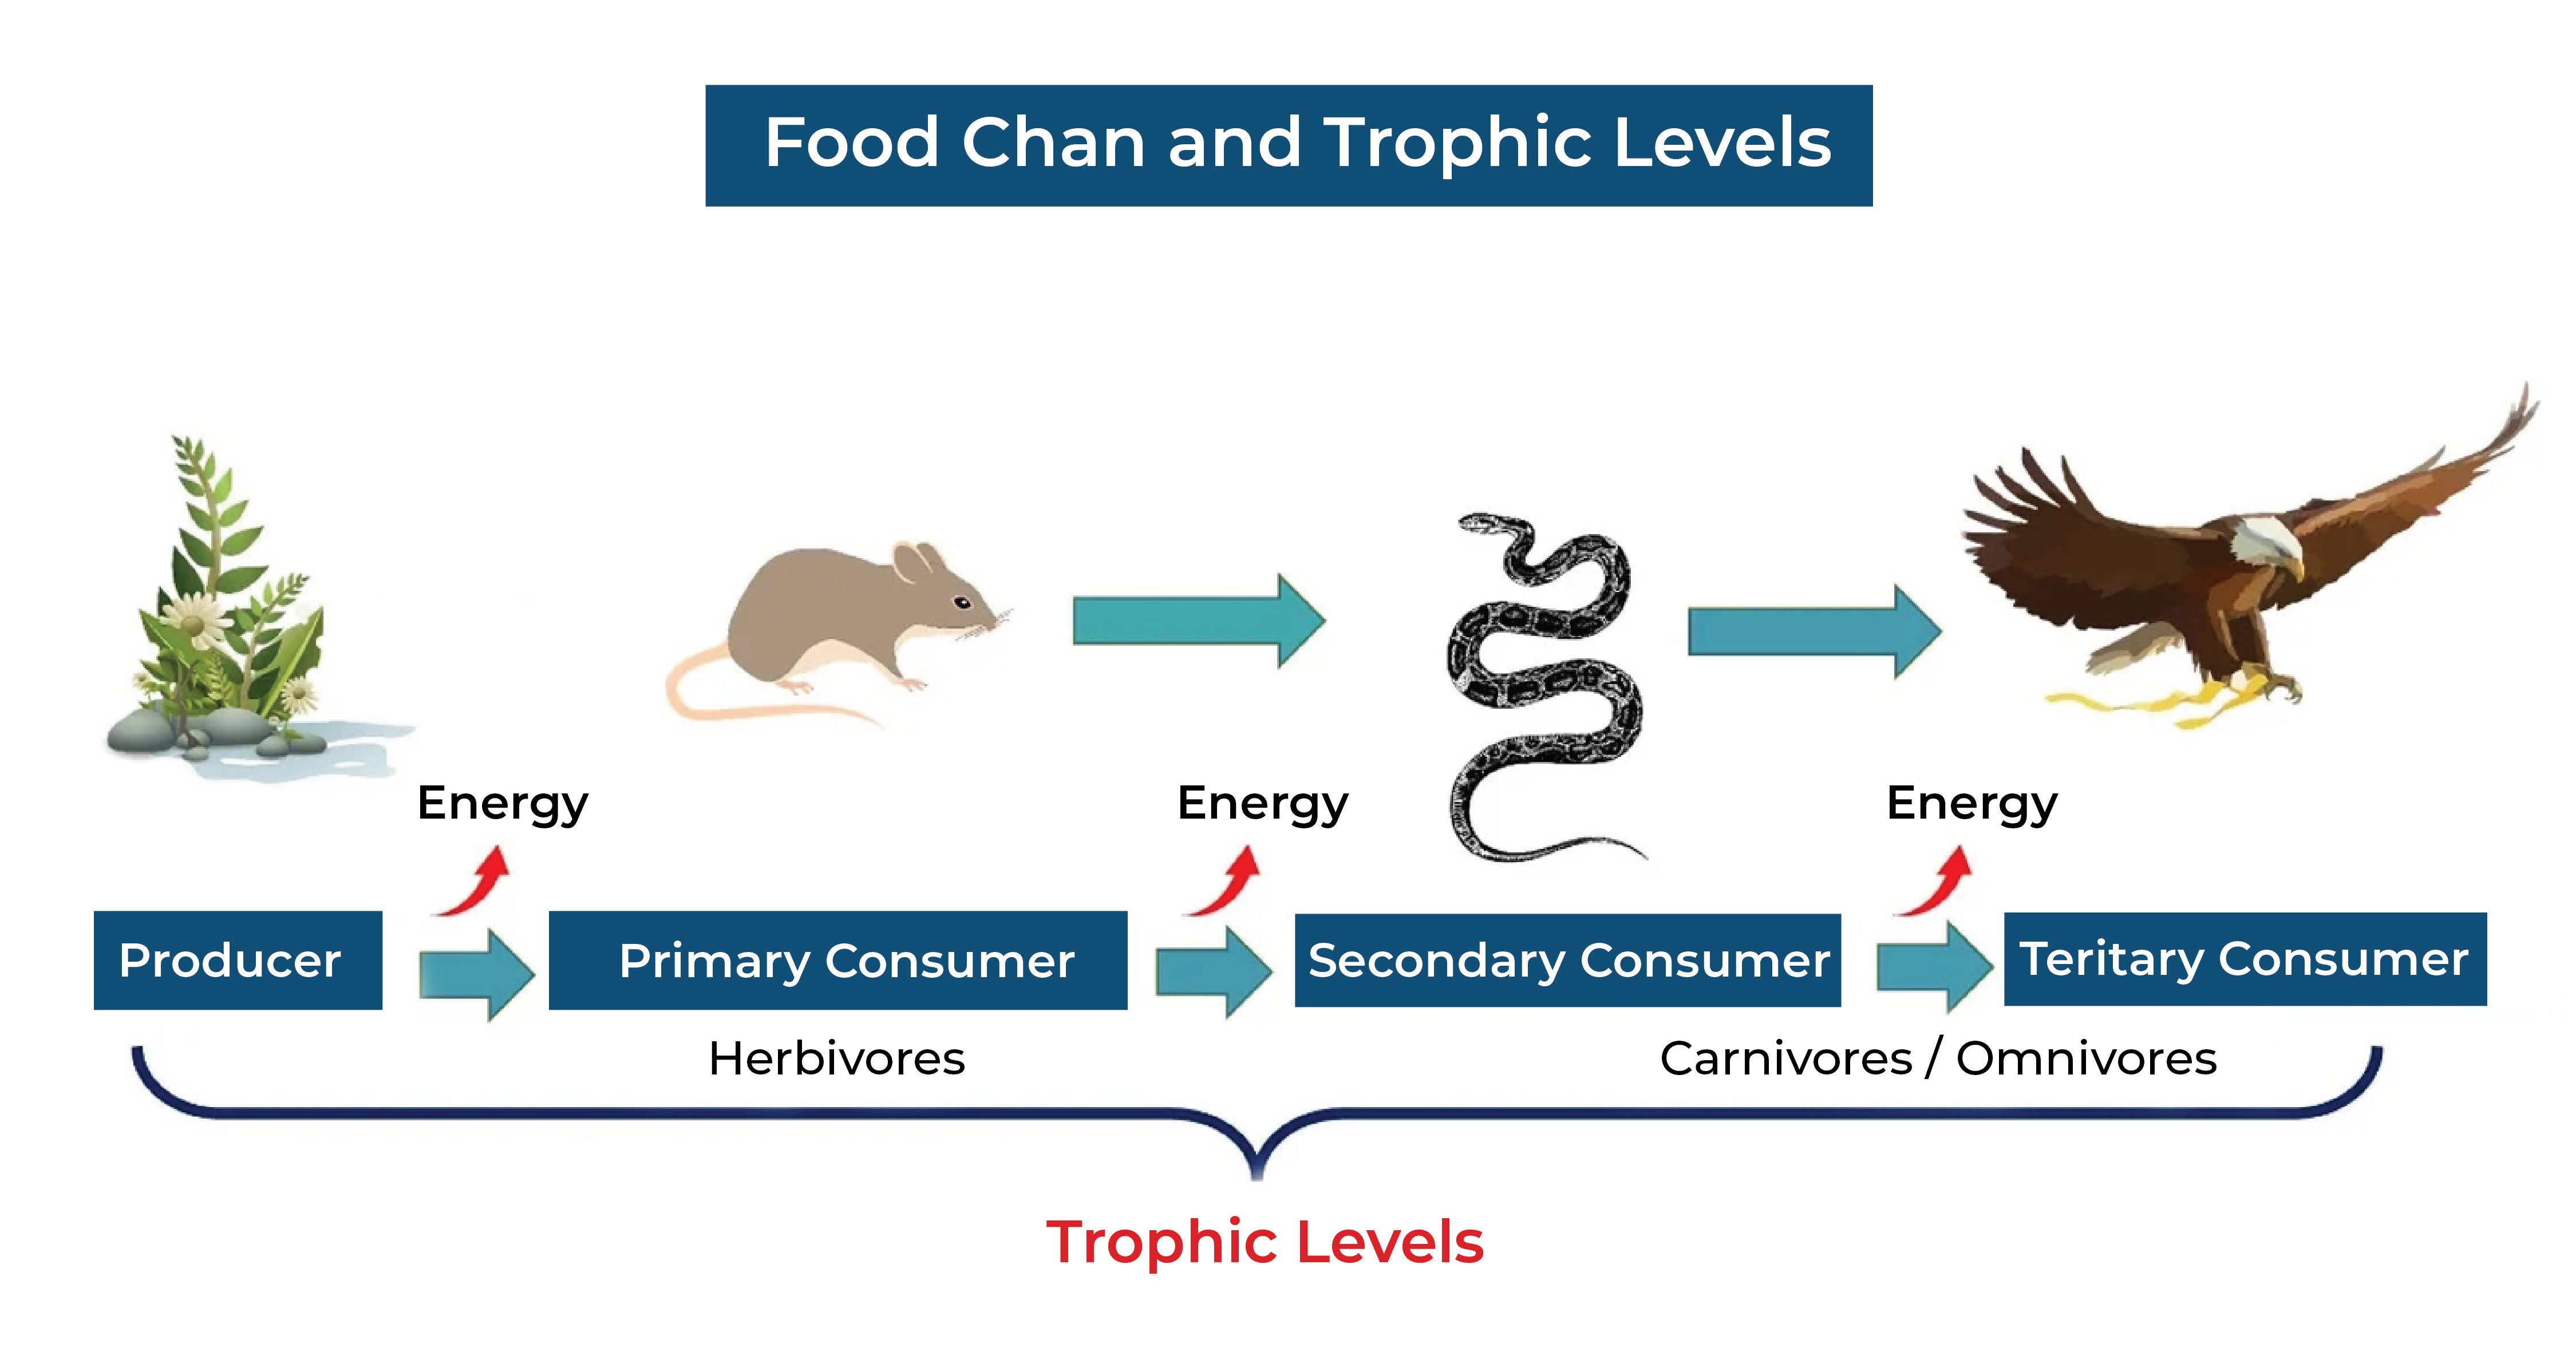 Trophic Level and Food Chains